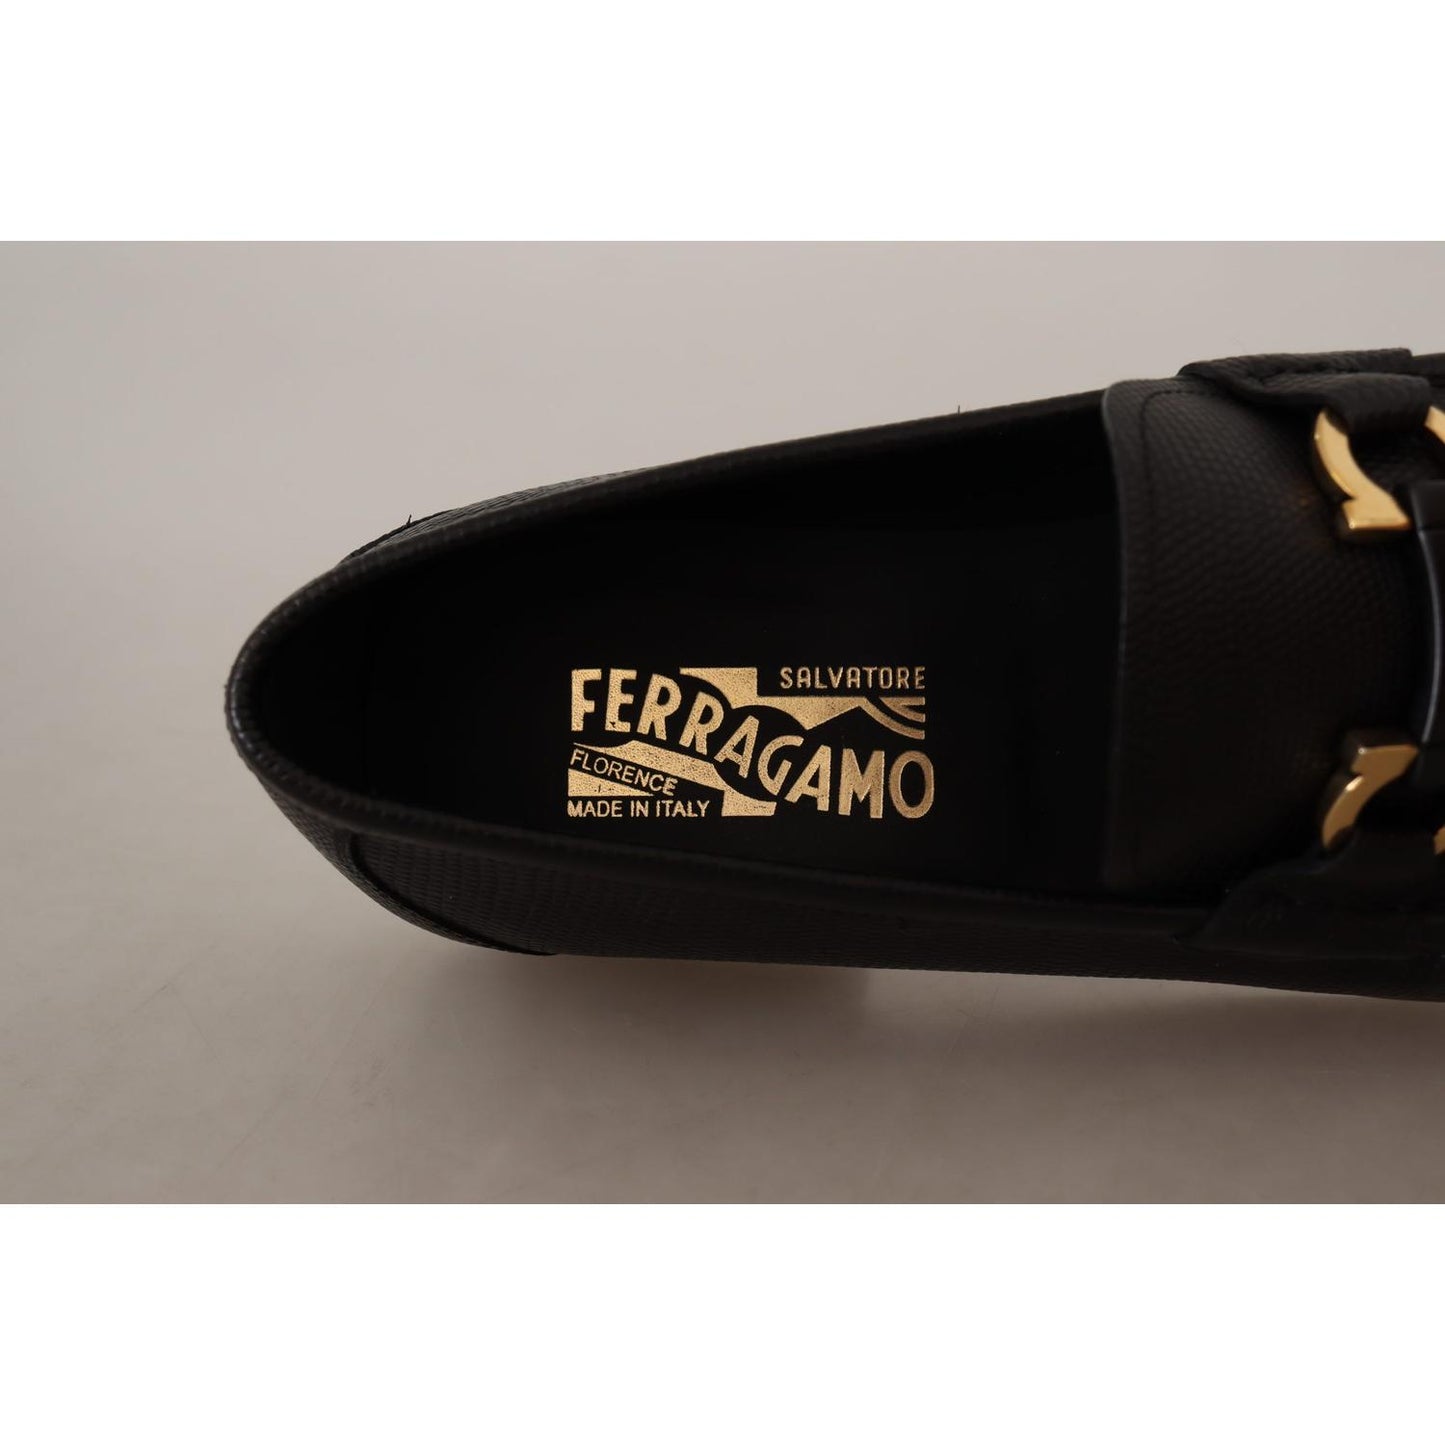 Salvatore Ferragamo Elegant Black Calf Leather Loafers Dress Shoes black-calf-leather-moccasins-loafers-shoes